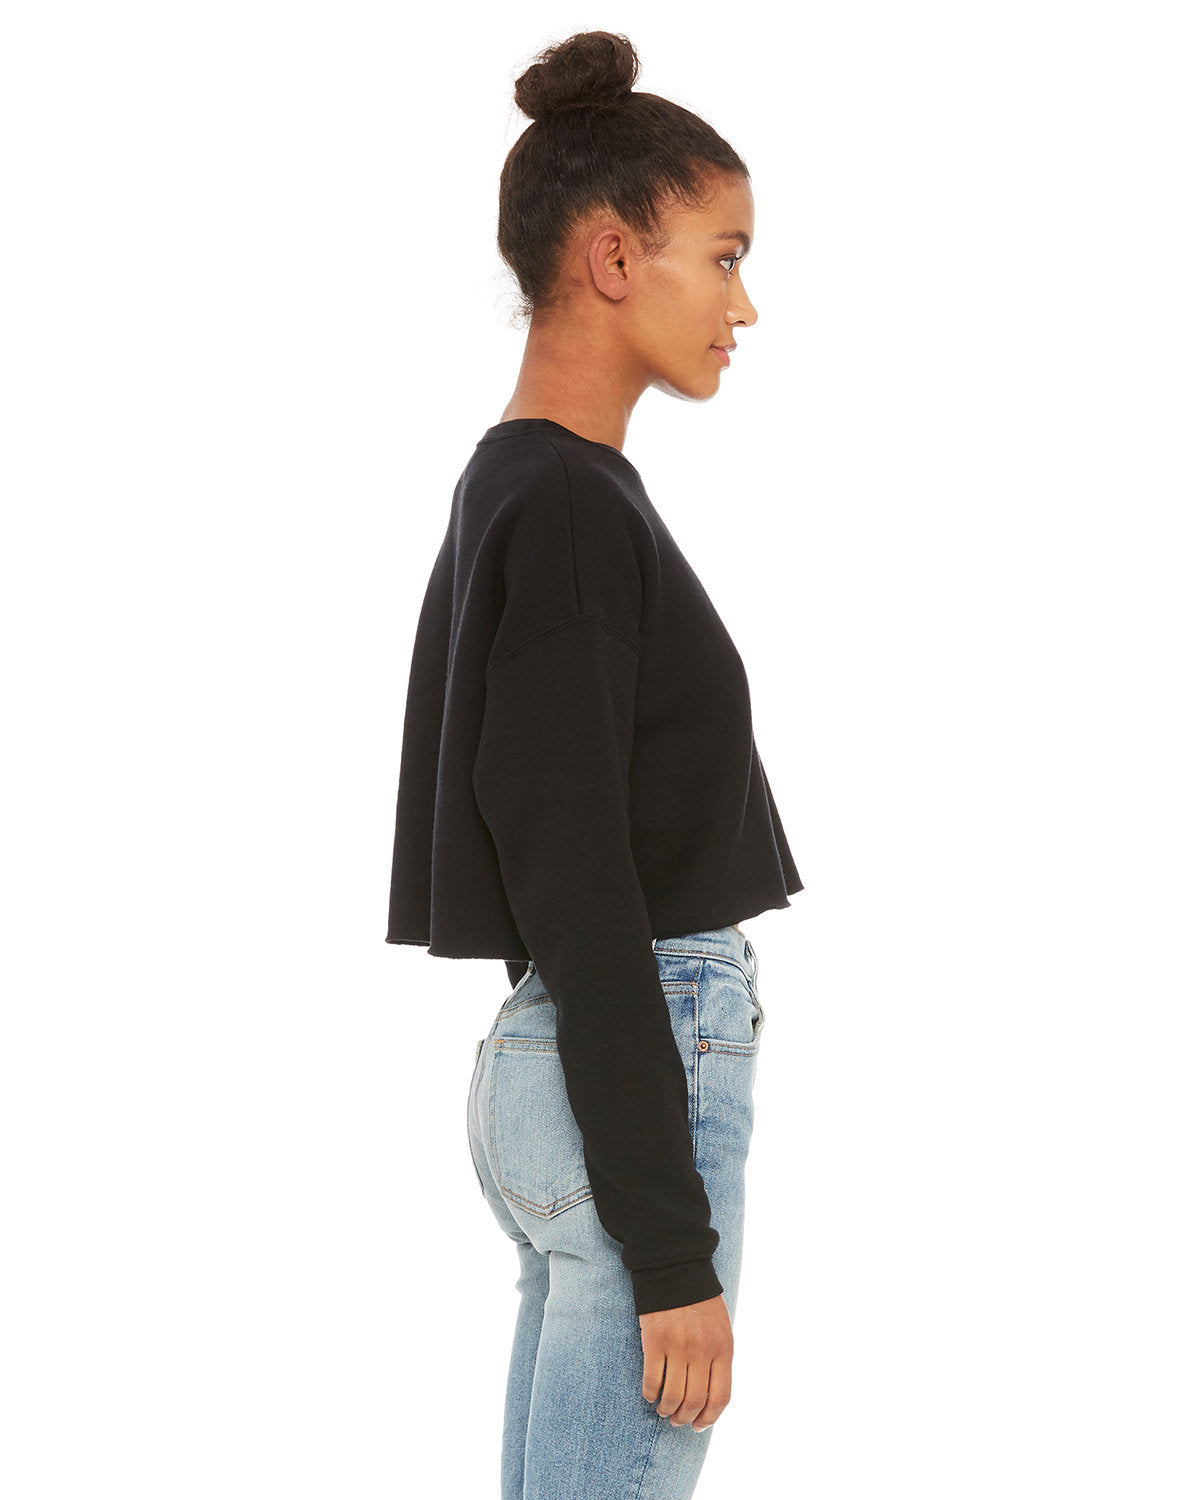 Black cropped top crew. Side view.